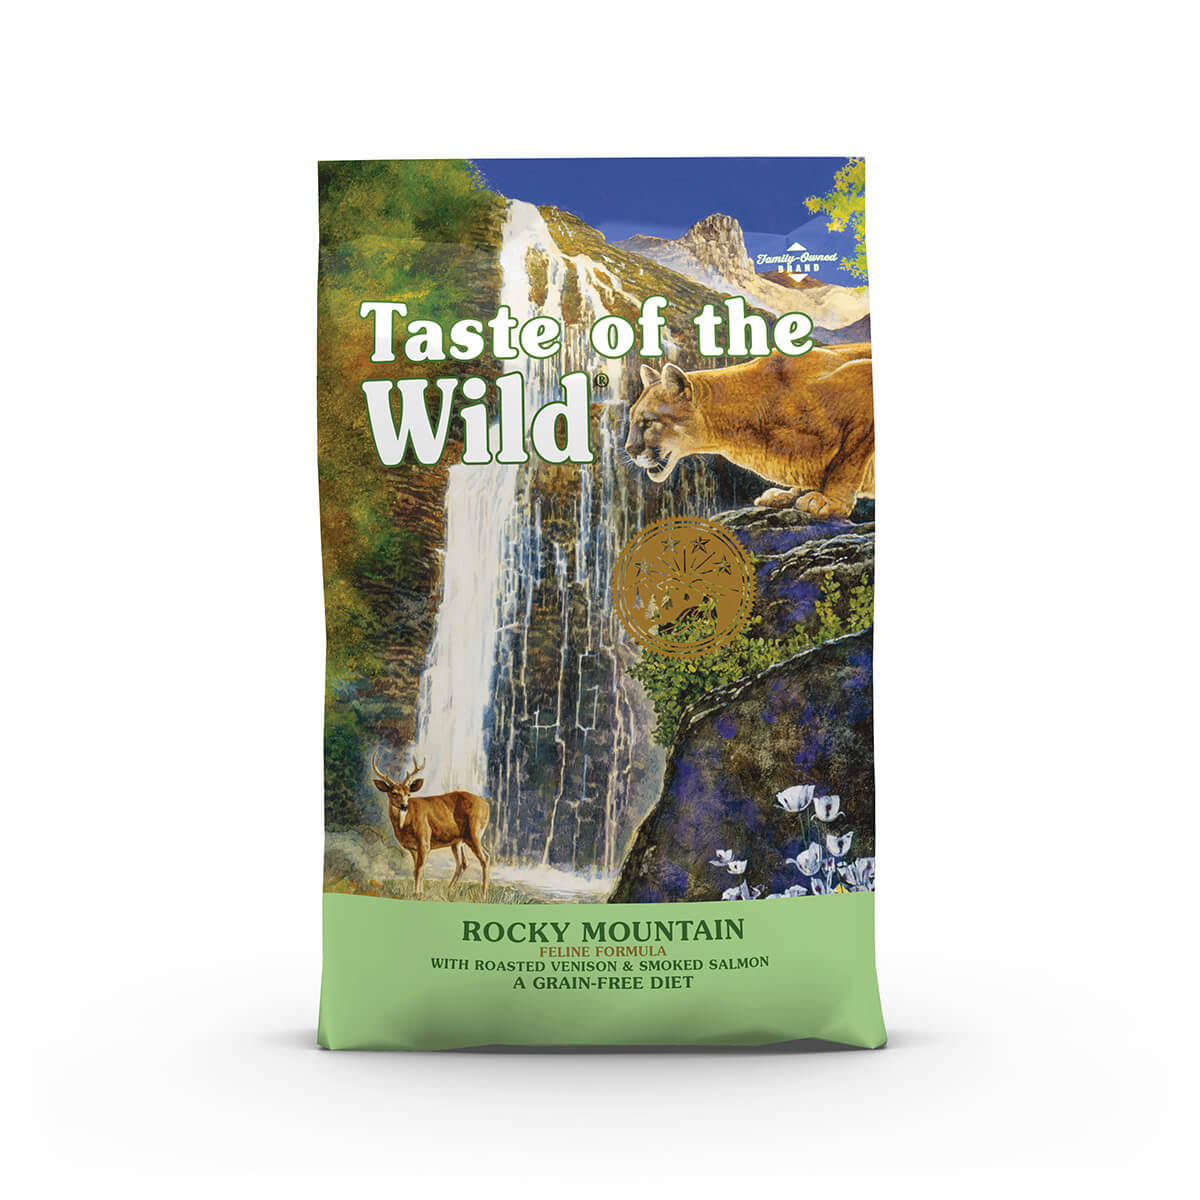 Taste of the Wild Cat Food - Rocky Mountain Feline Formula with Roasted Venison and Smoked Salmon